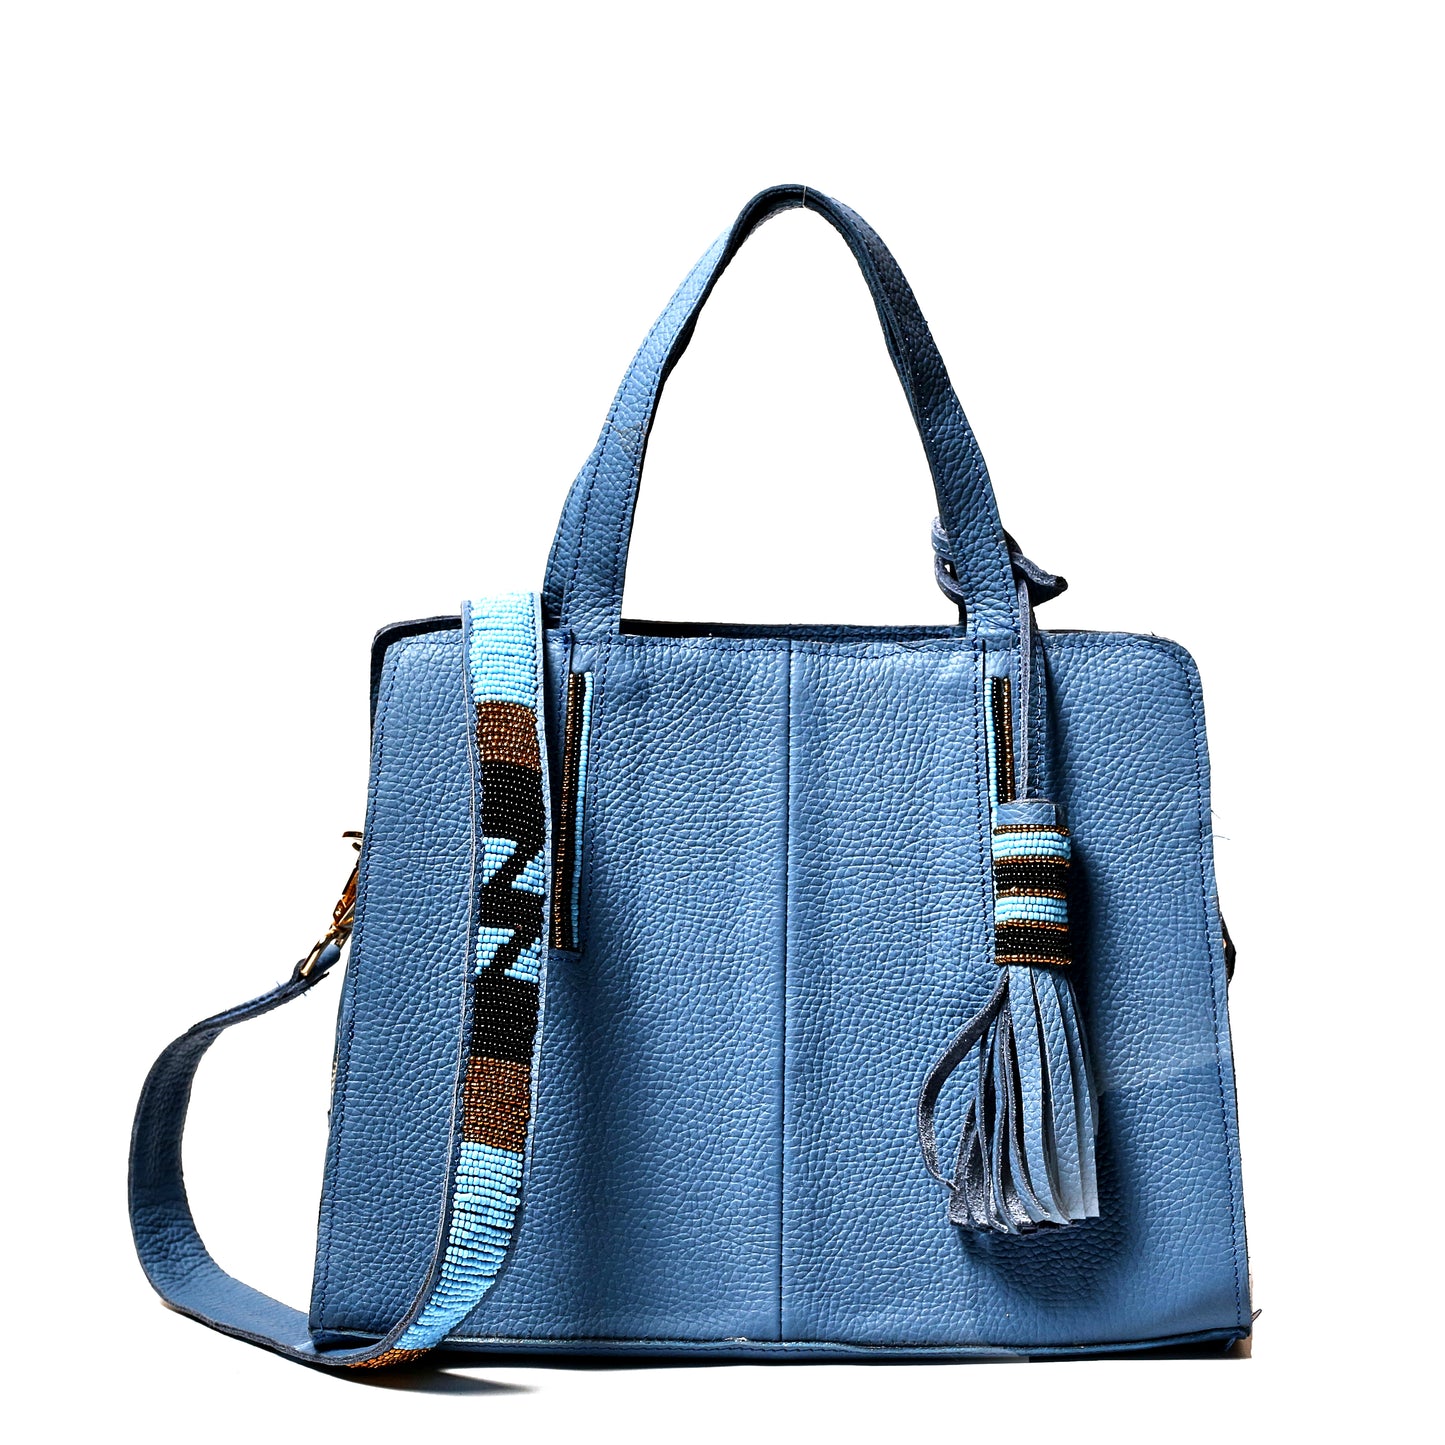 Kate bag in Galaxy blue milled leather and with Maasai beaded strap.